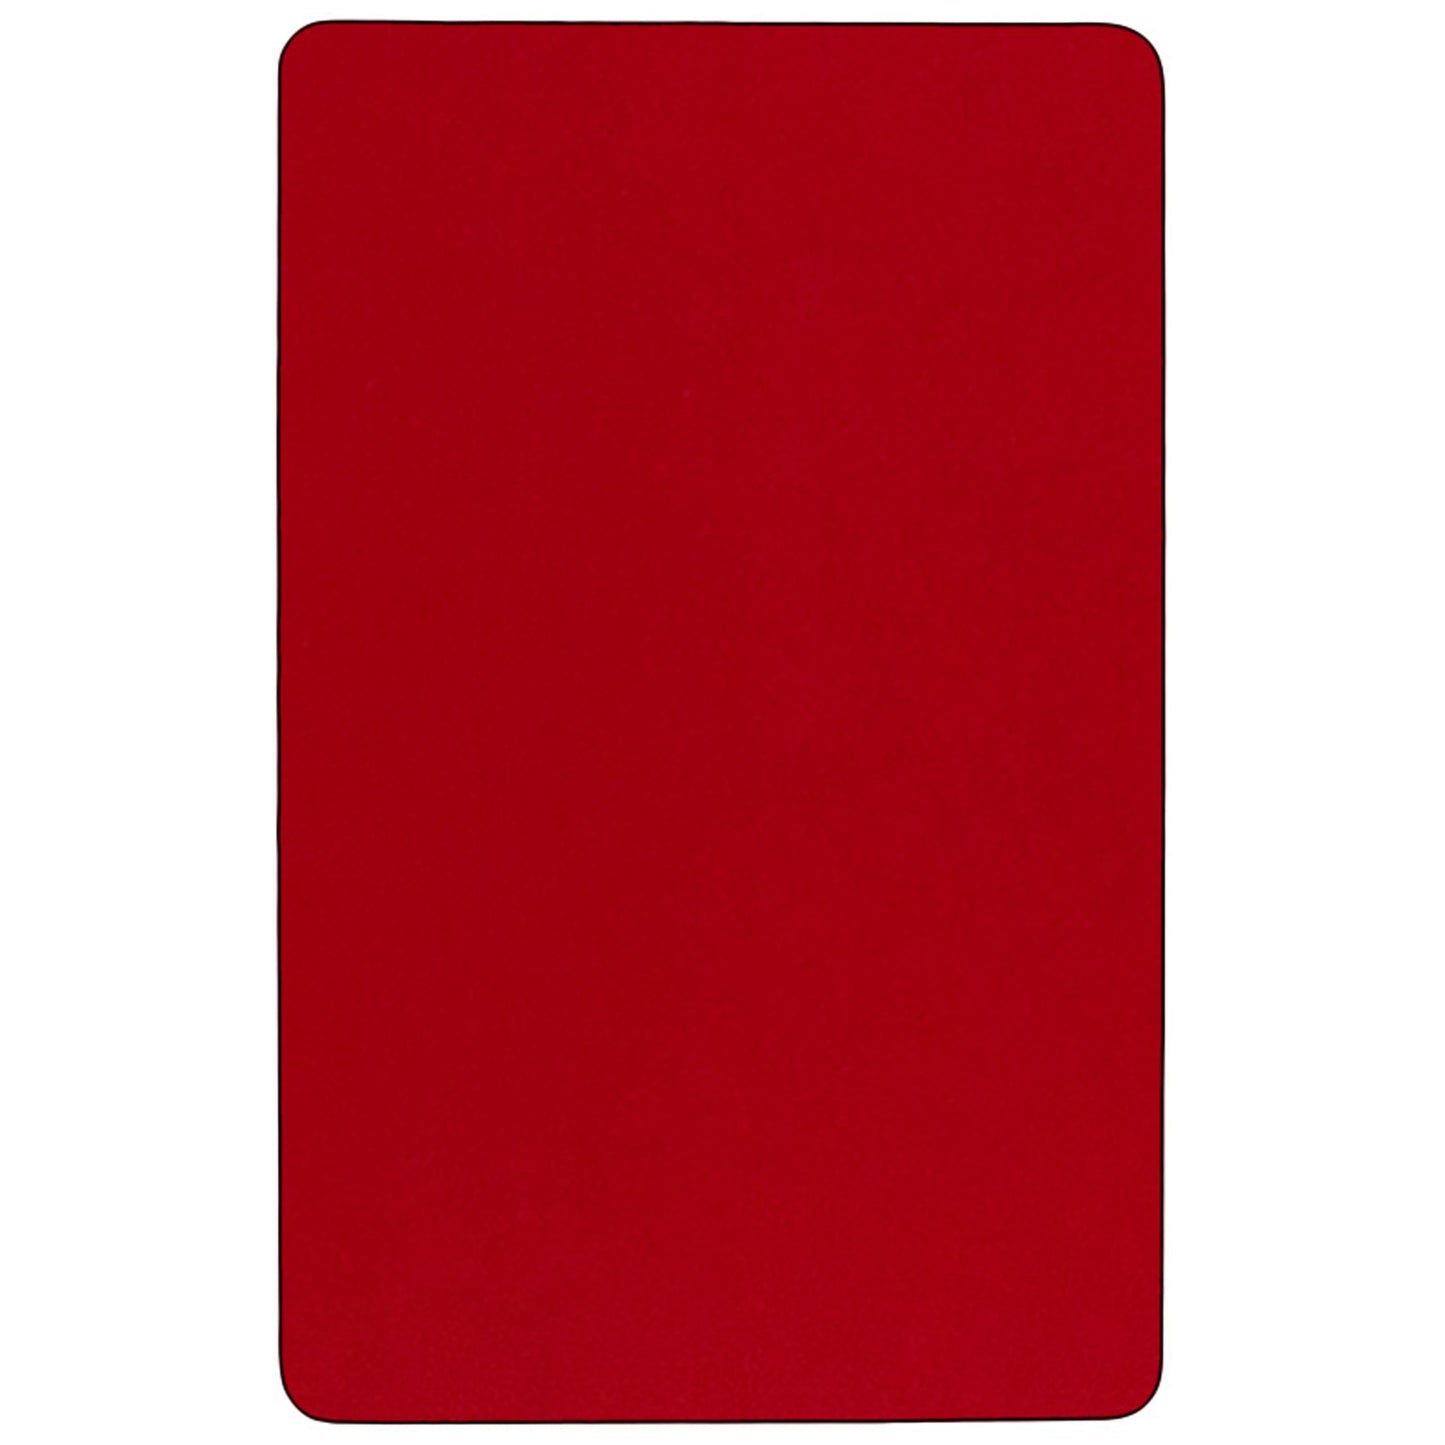 36x72 REC Red Activity Table XU-A3672-REC-RED-T-P-GG